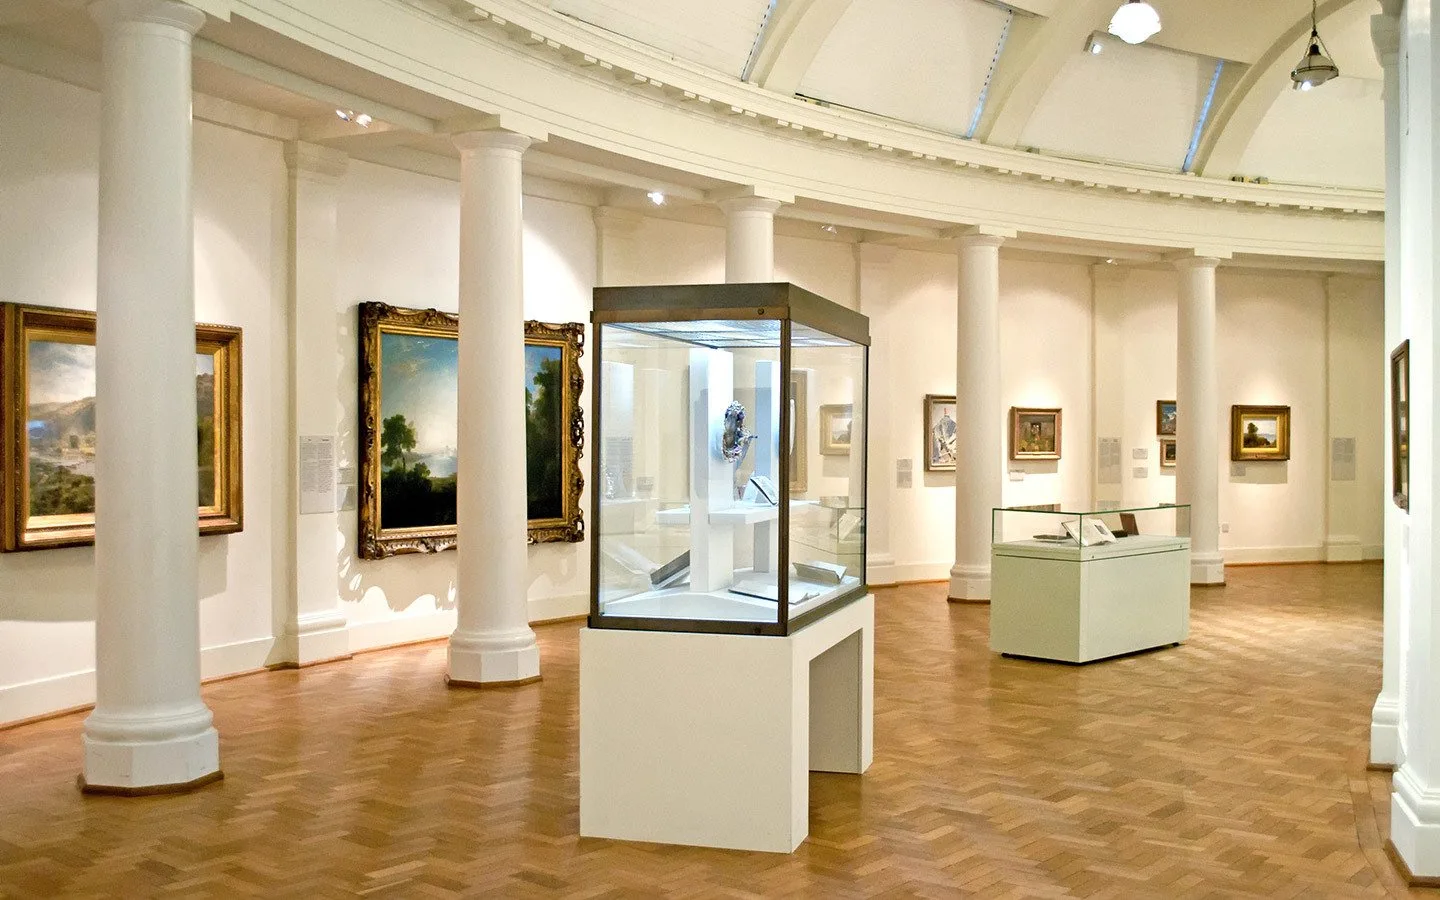 Inside the art galleries at the Cardiff Museum, Wales